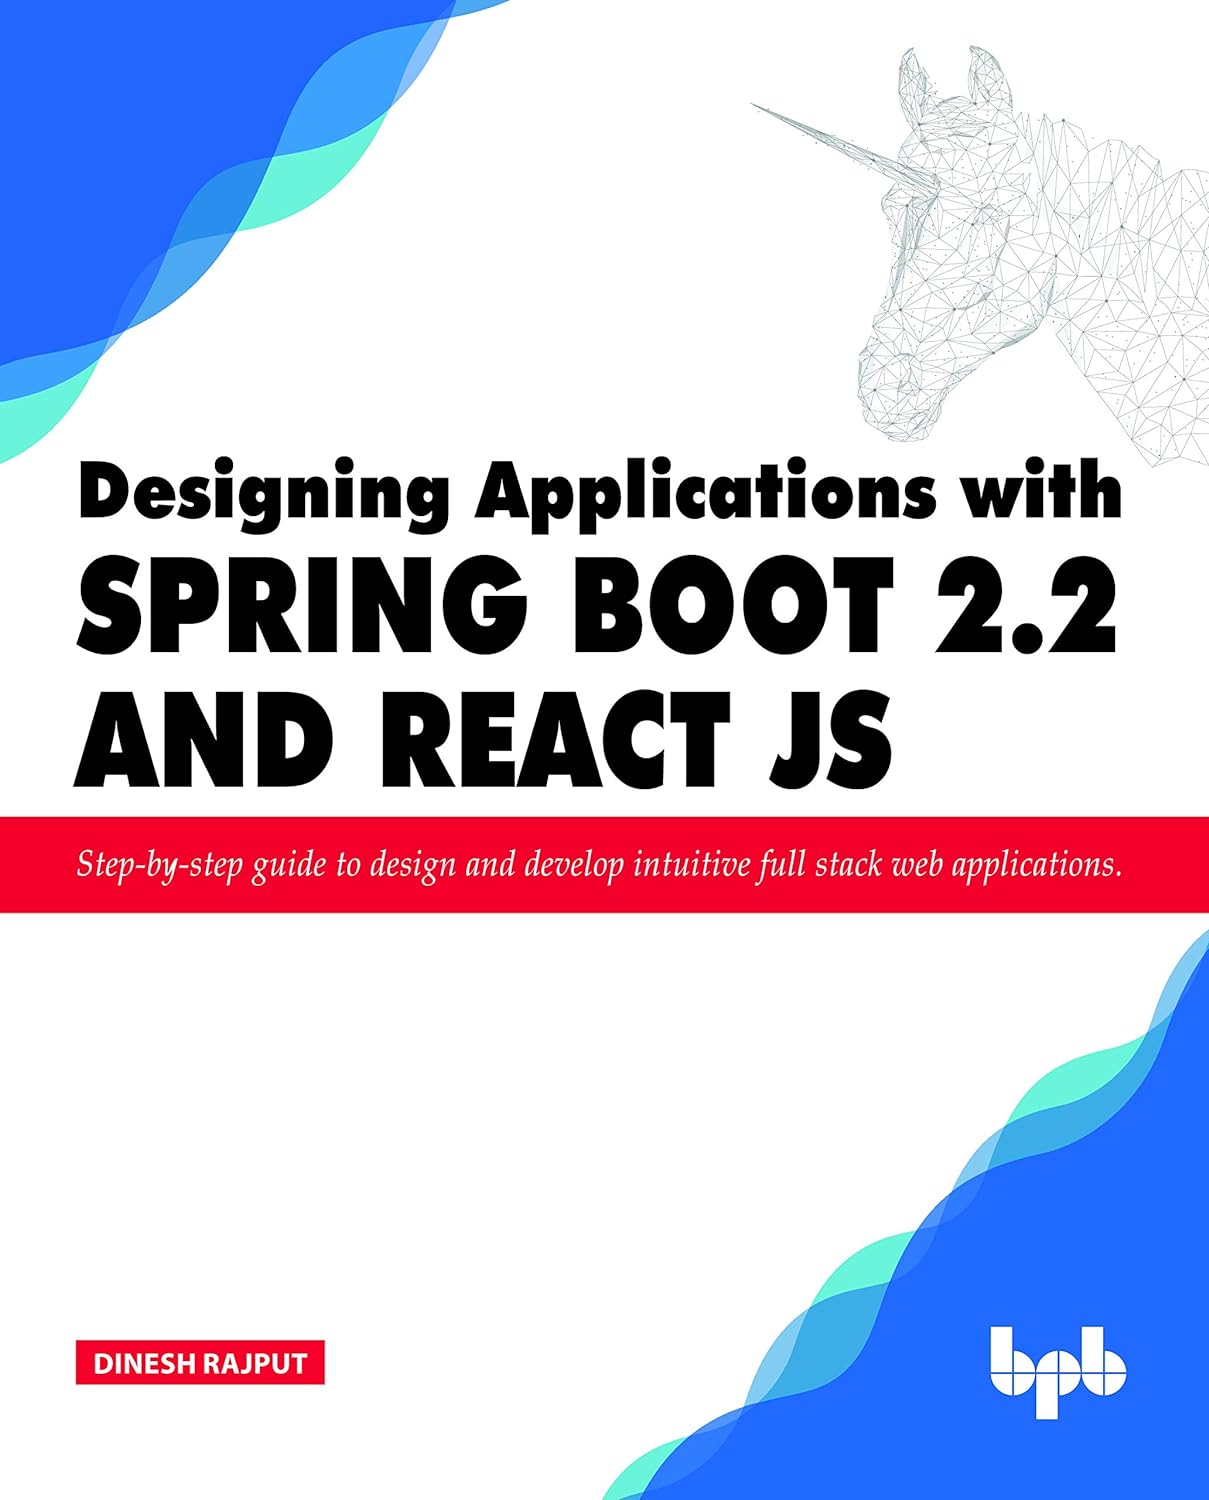 Designing Applications with Spring Boot 2.2 and React JS: Step-by-step guide to design and develop intuitive full stack web applications by Dinesh Rajput